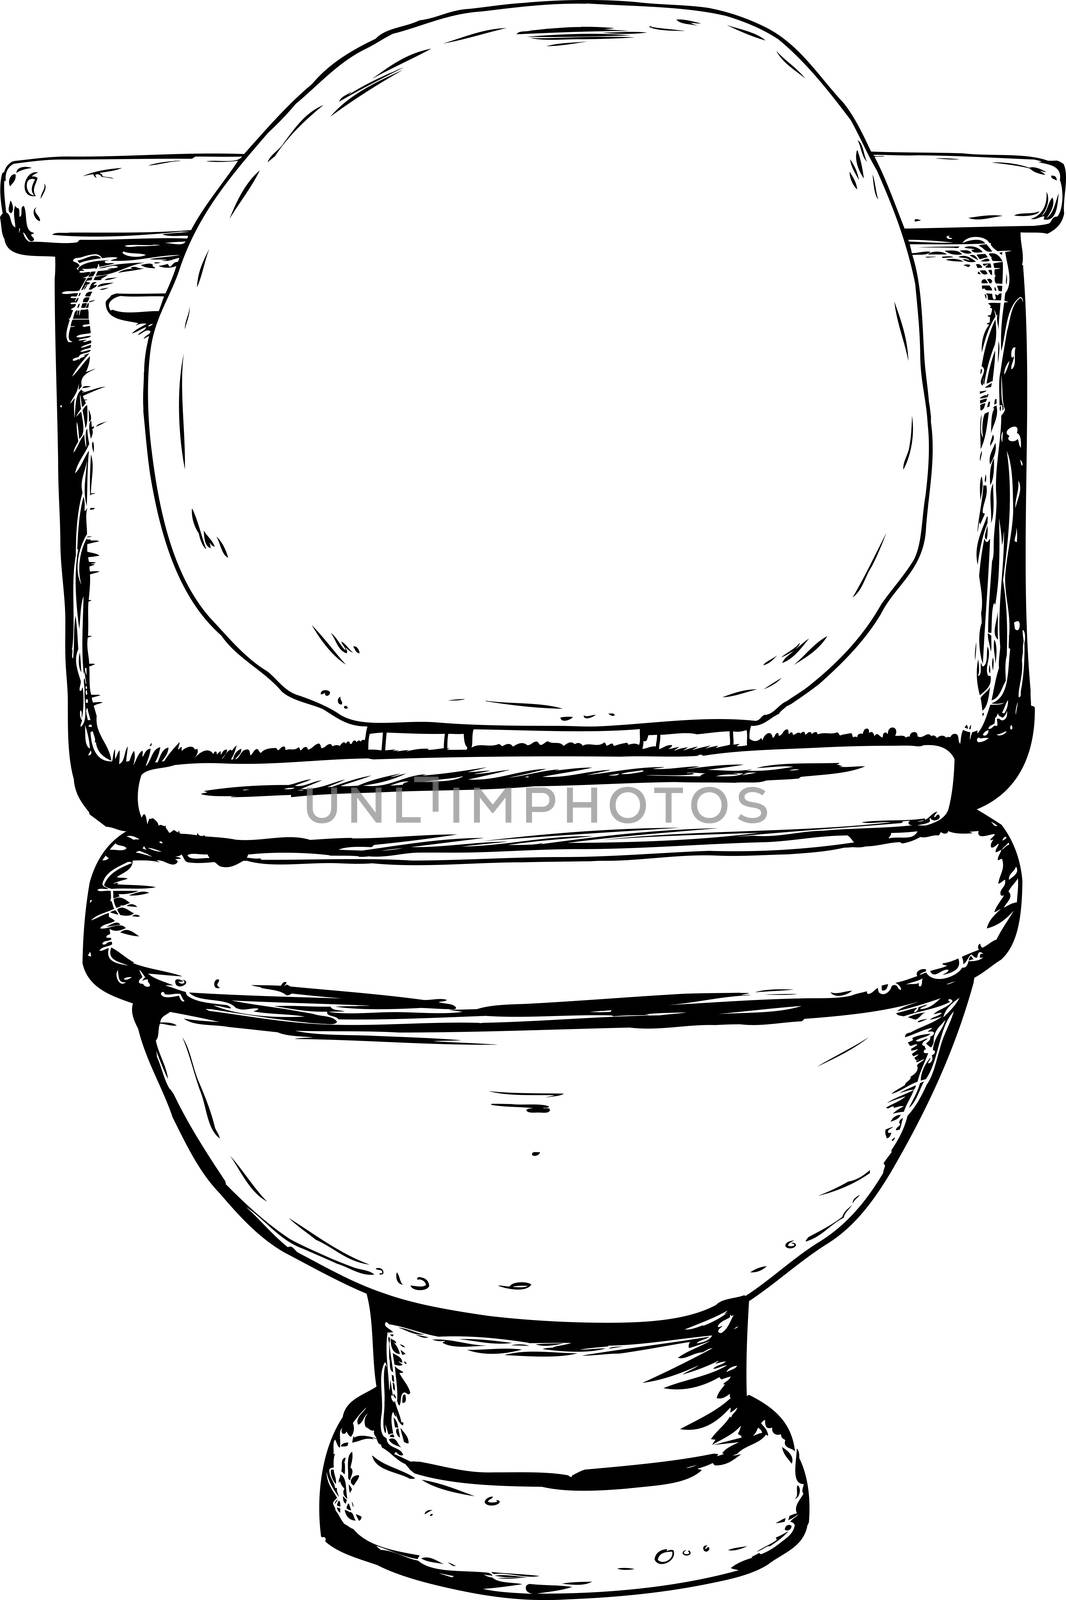 Outlined toilet with shut lid by TheBlackRhino